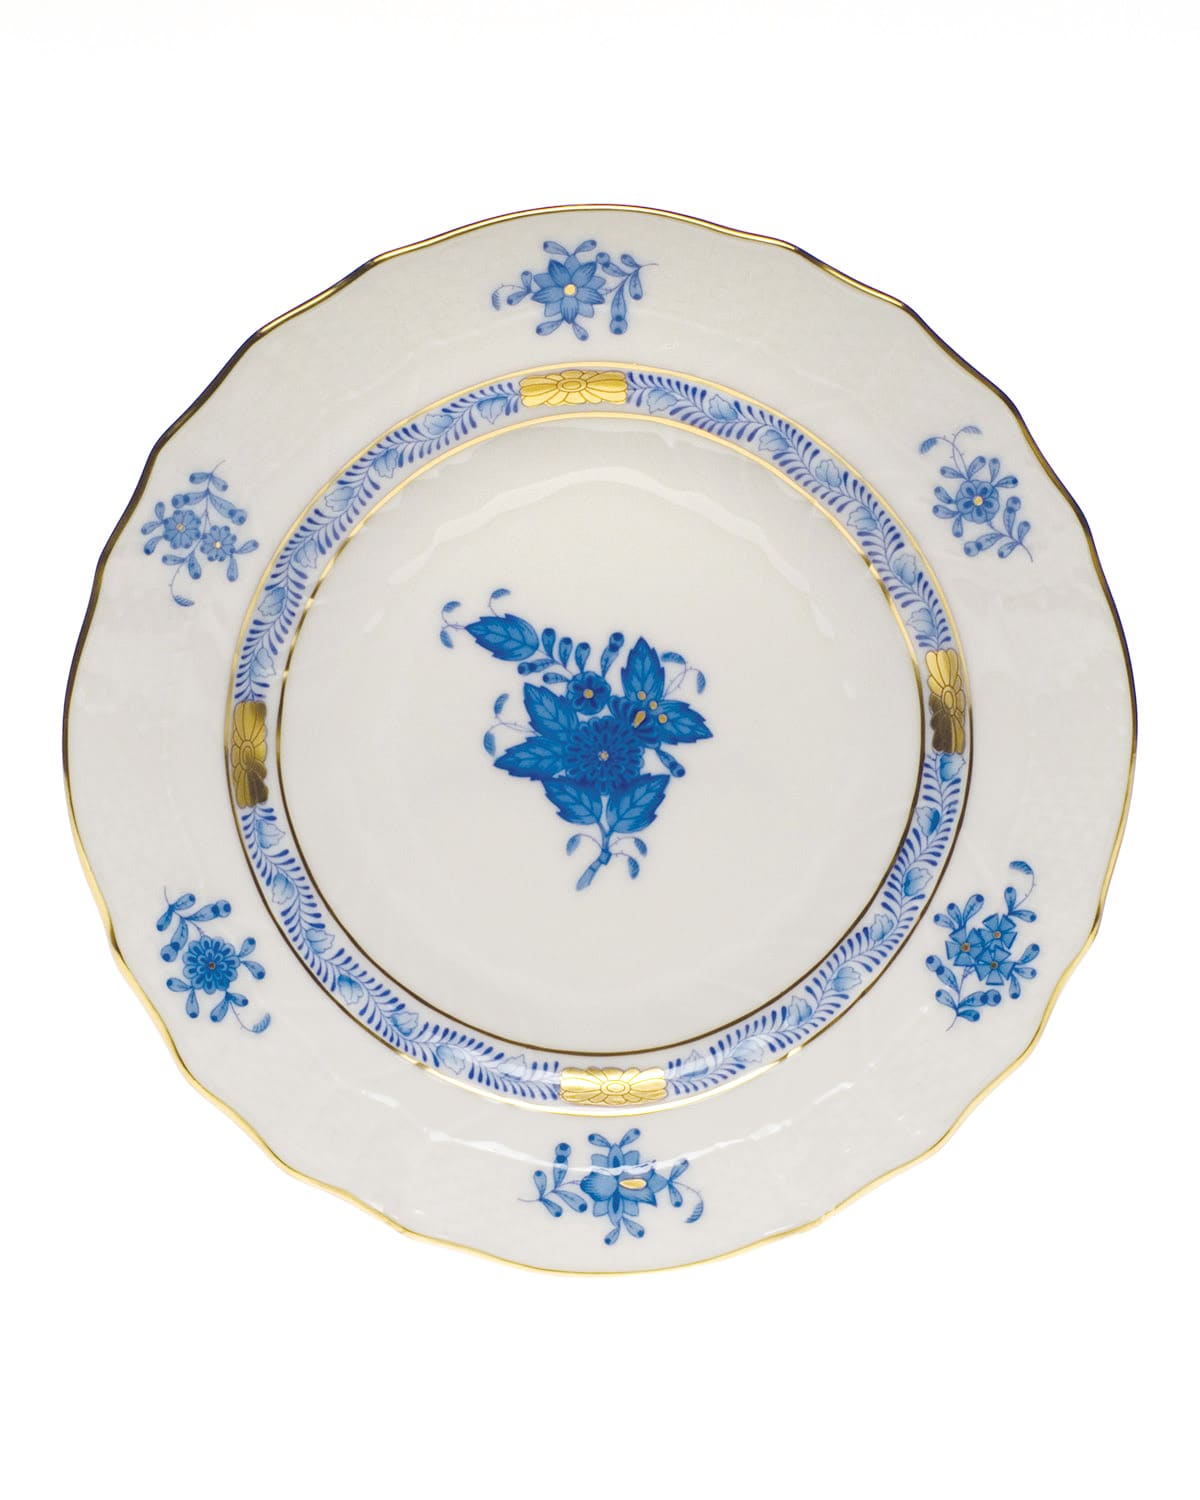 HEREND BLUE CHINESE BOUQUET BREAD & BUTTER PLATE